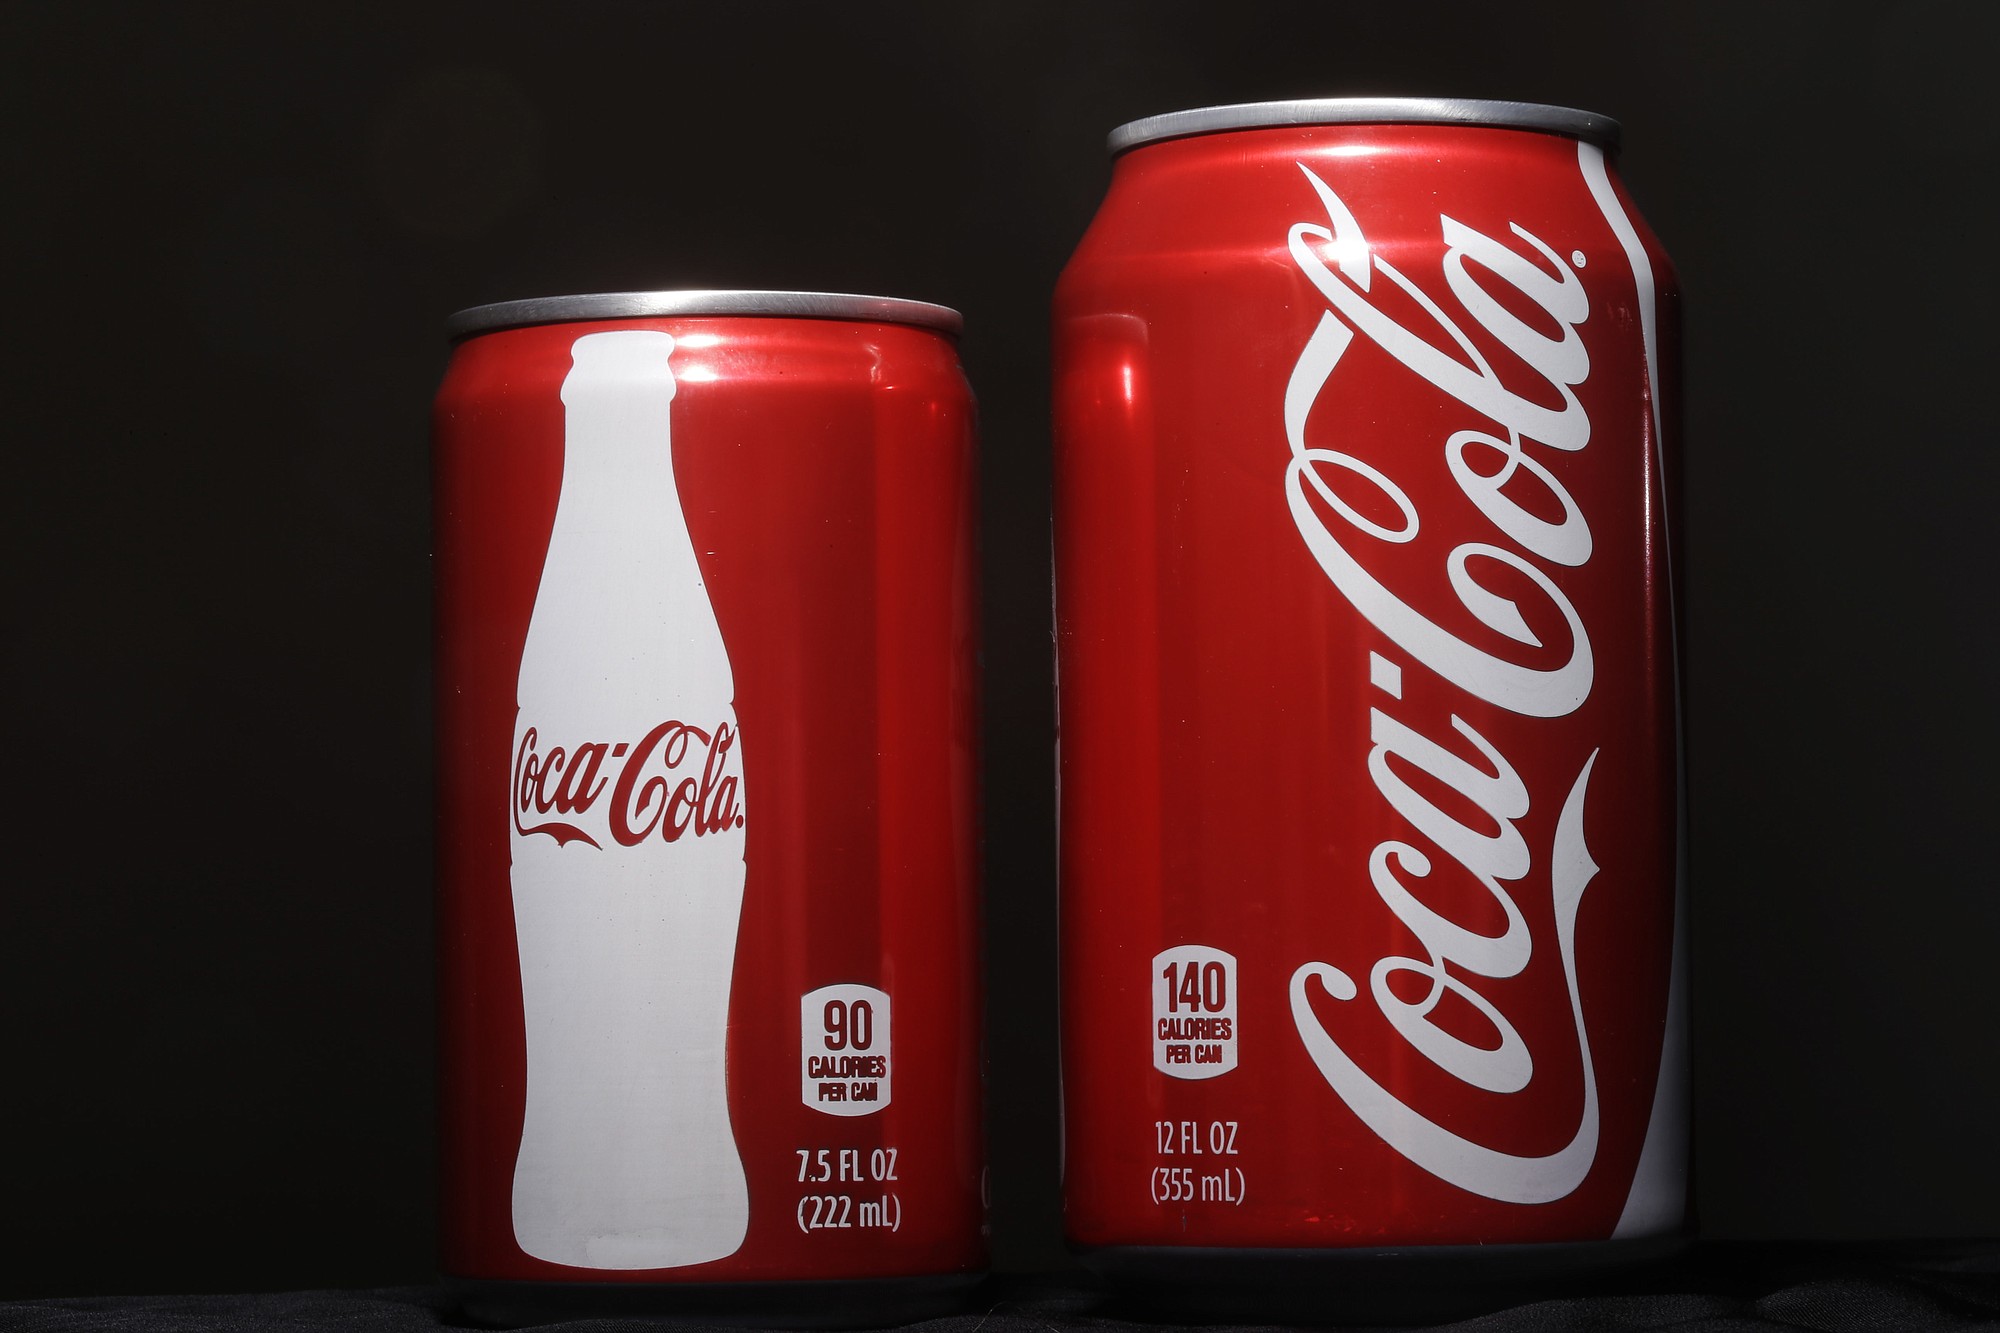 A 7.5-ounce can of Coca-cola, left, is next to a 12-ounce can for comparison.